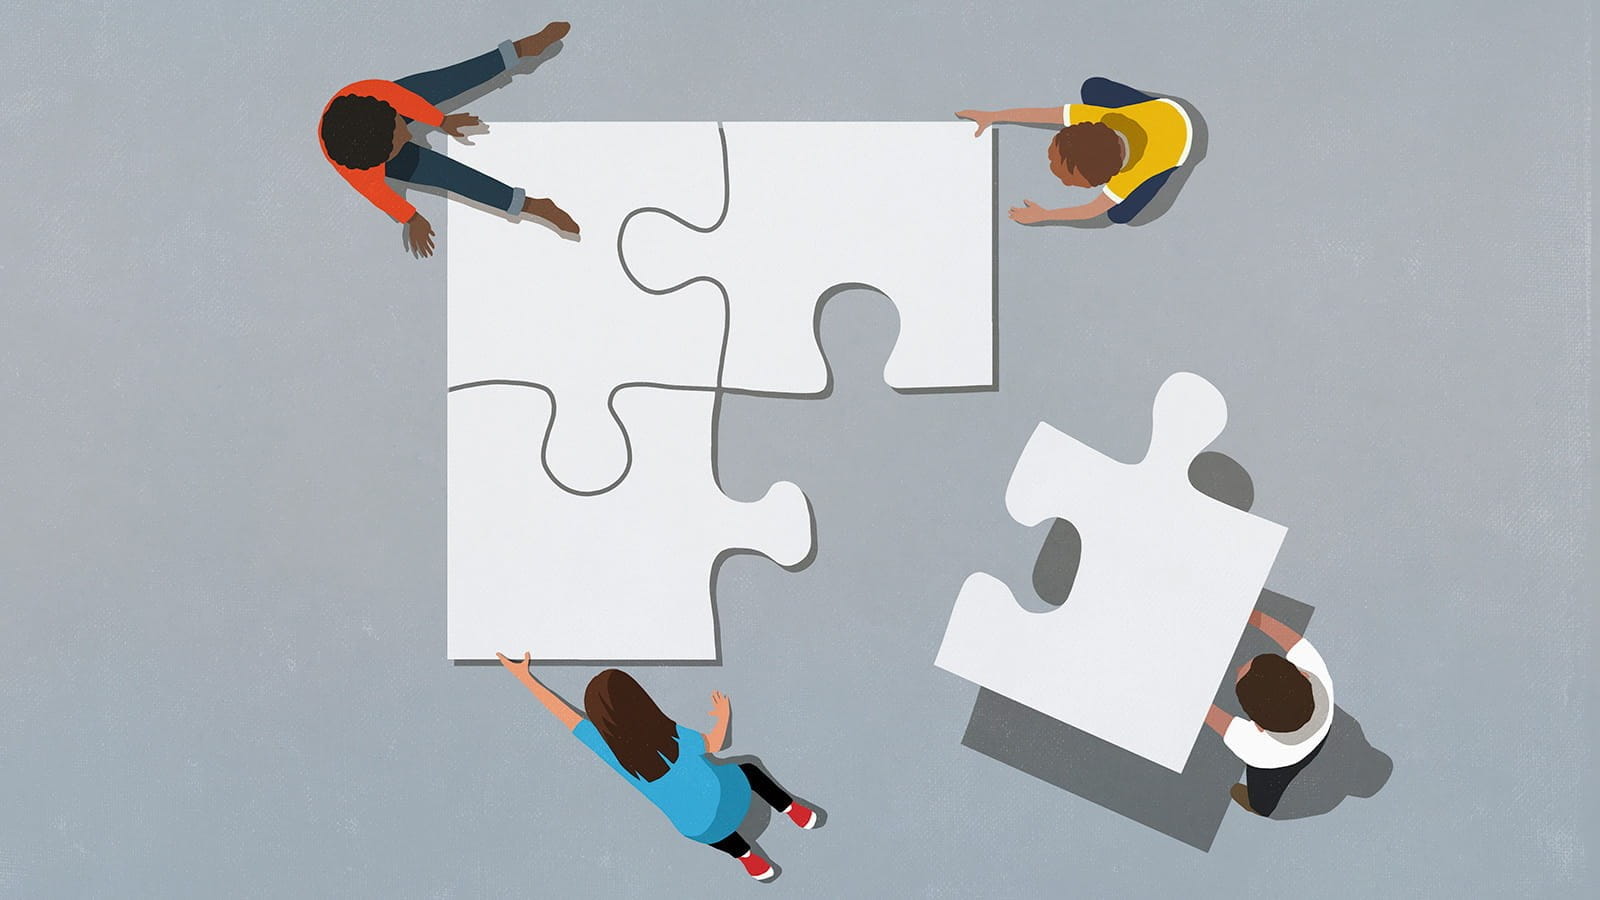 Illustration of people putting a giant 4-piece jigsaw together